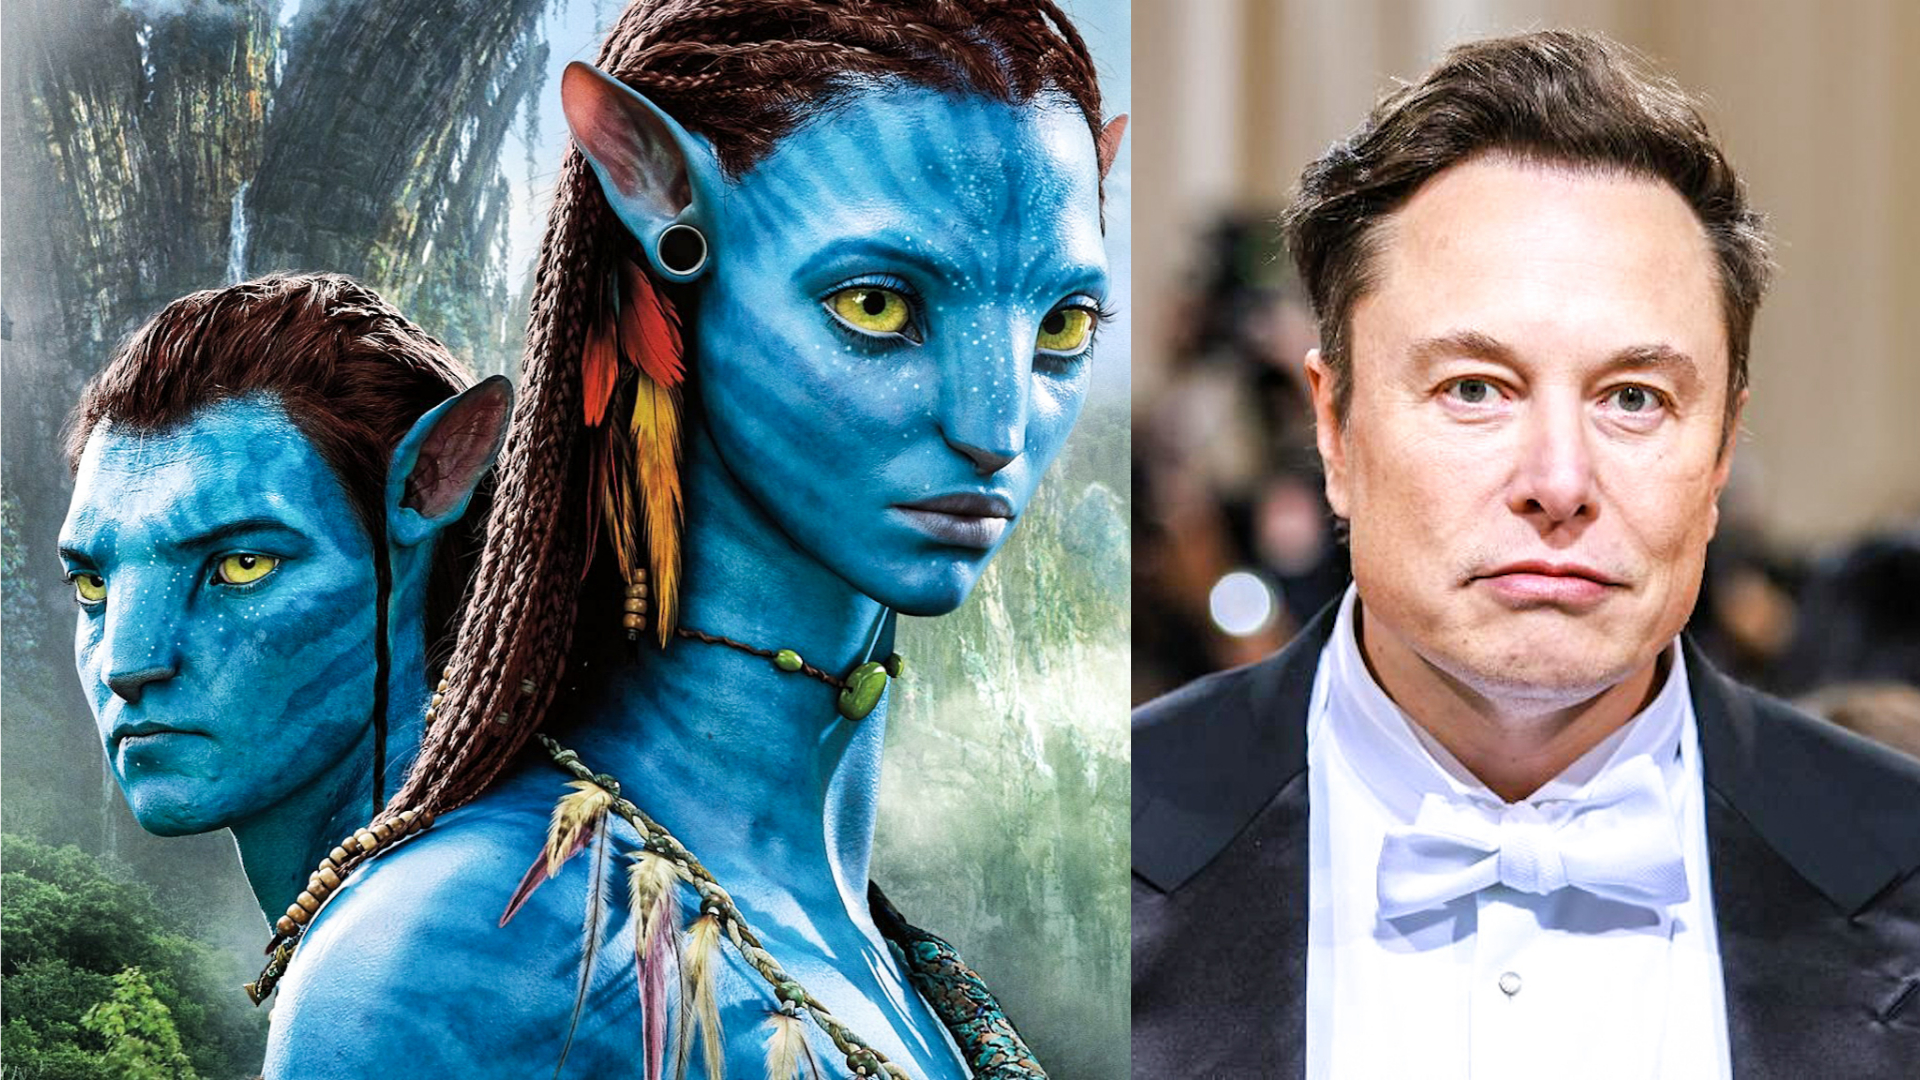 From ‘Avatar’ to Elon Musk exploration is out and culture war is in